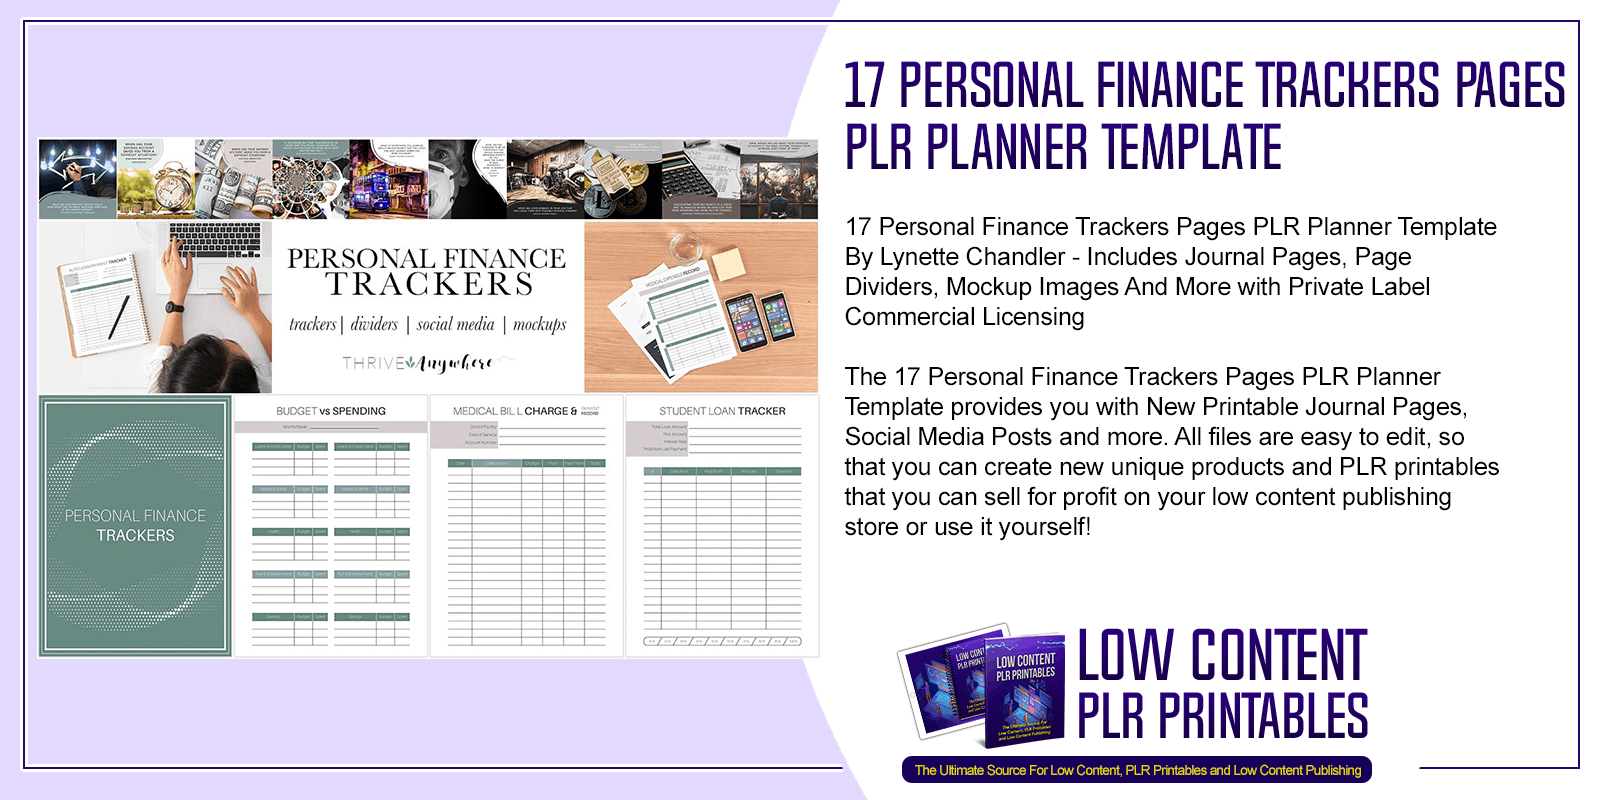 17 Personal Finance Trackers Pages PLR Planner Template